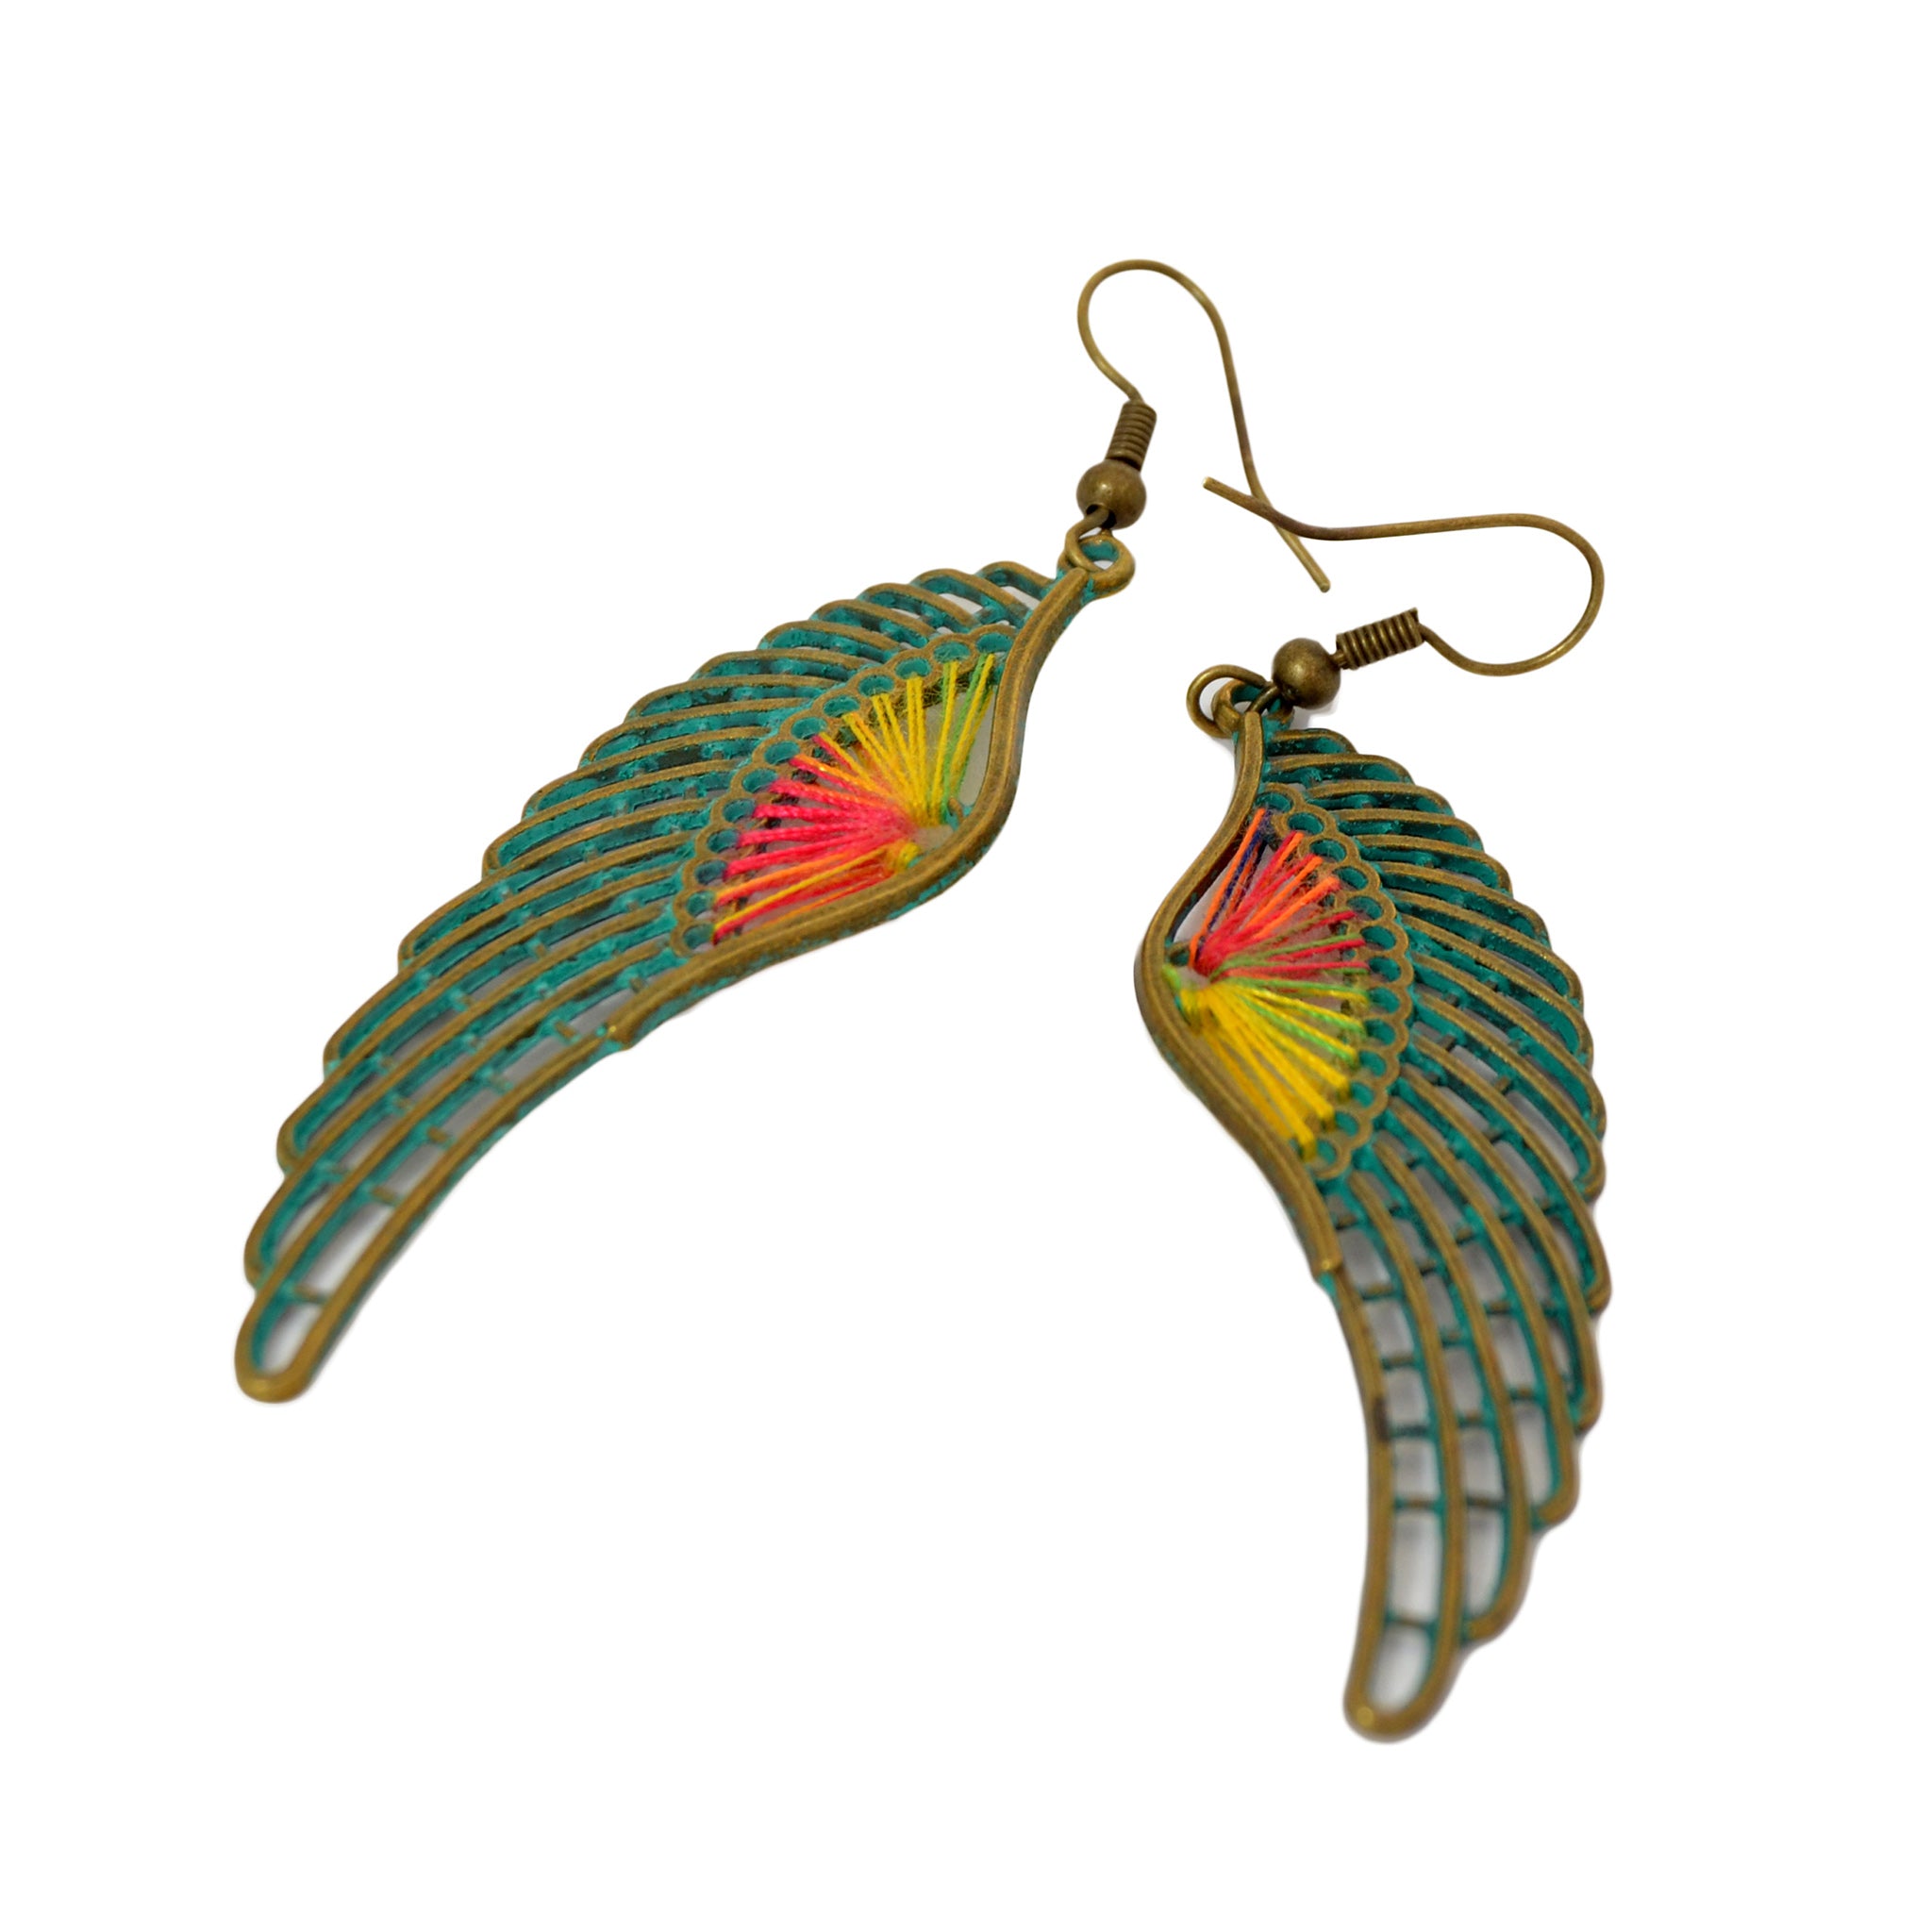 Wing dangle hook earrings with colored threads and old green patina on brass